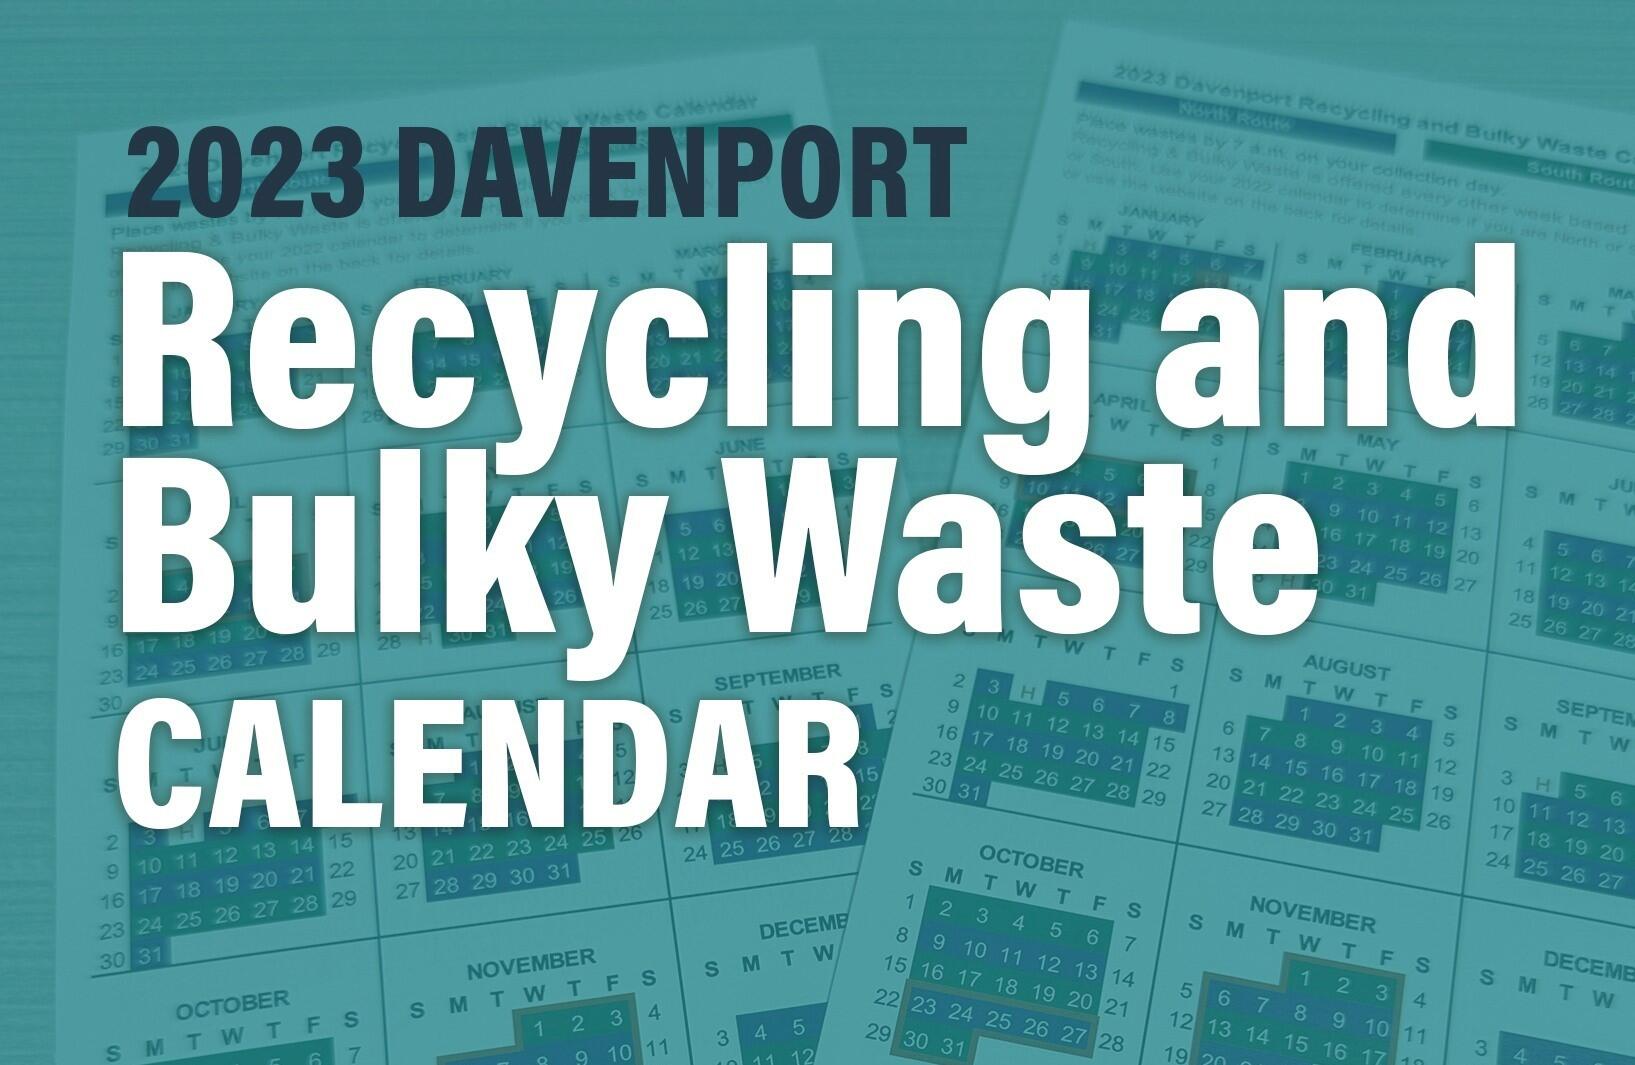 Recycling and Bulky Waste Calendar Reminder (City of Davenport